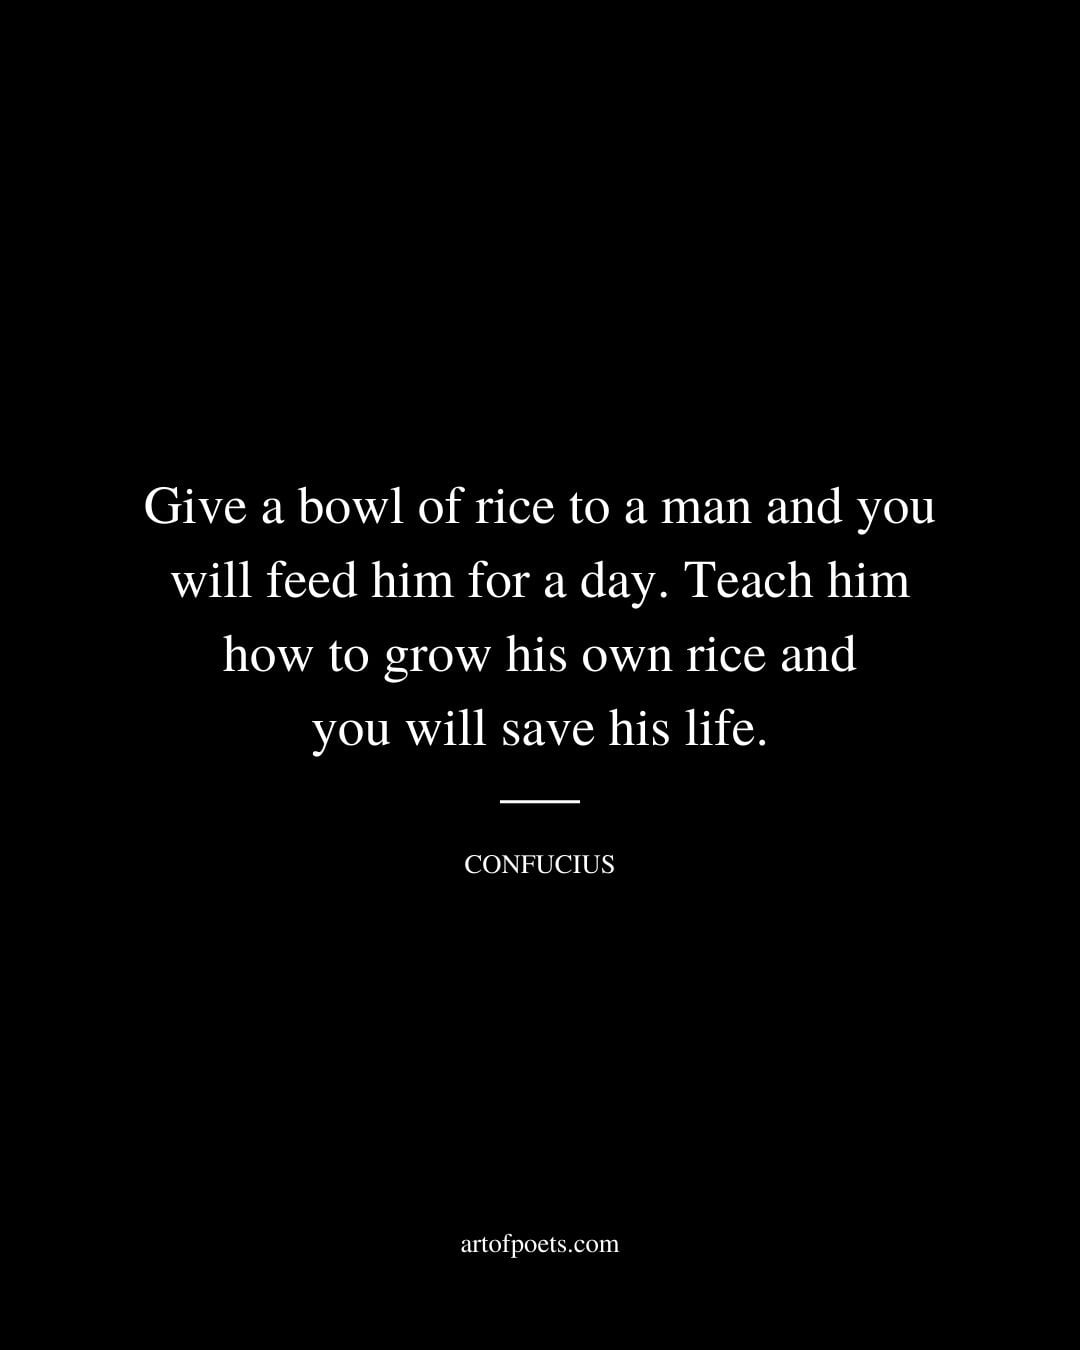 Give a bowl of rice to a man and you will feed him for a day. Teach him how to grow his own rice and you will save his life